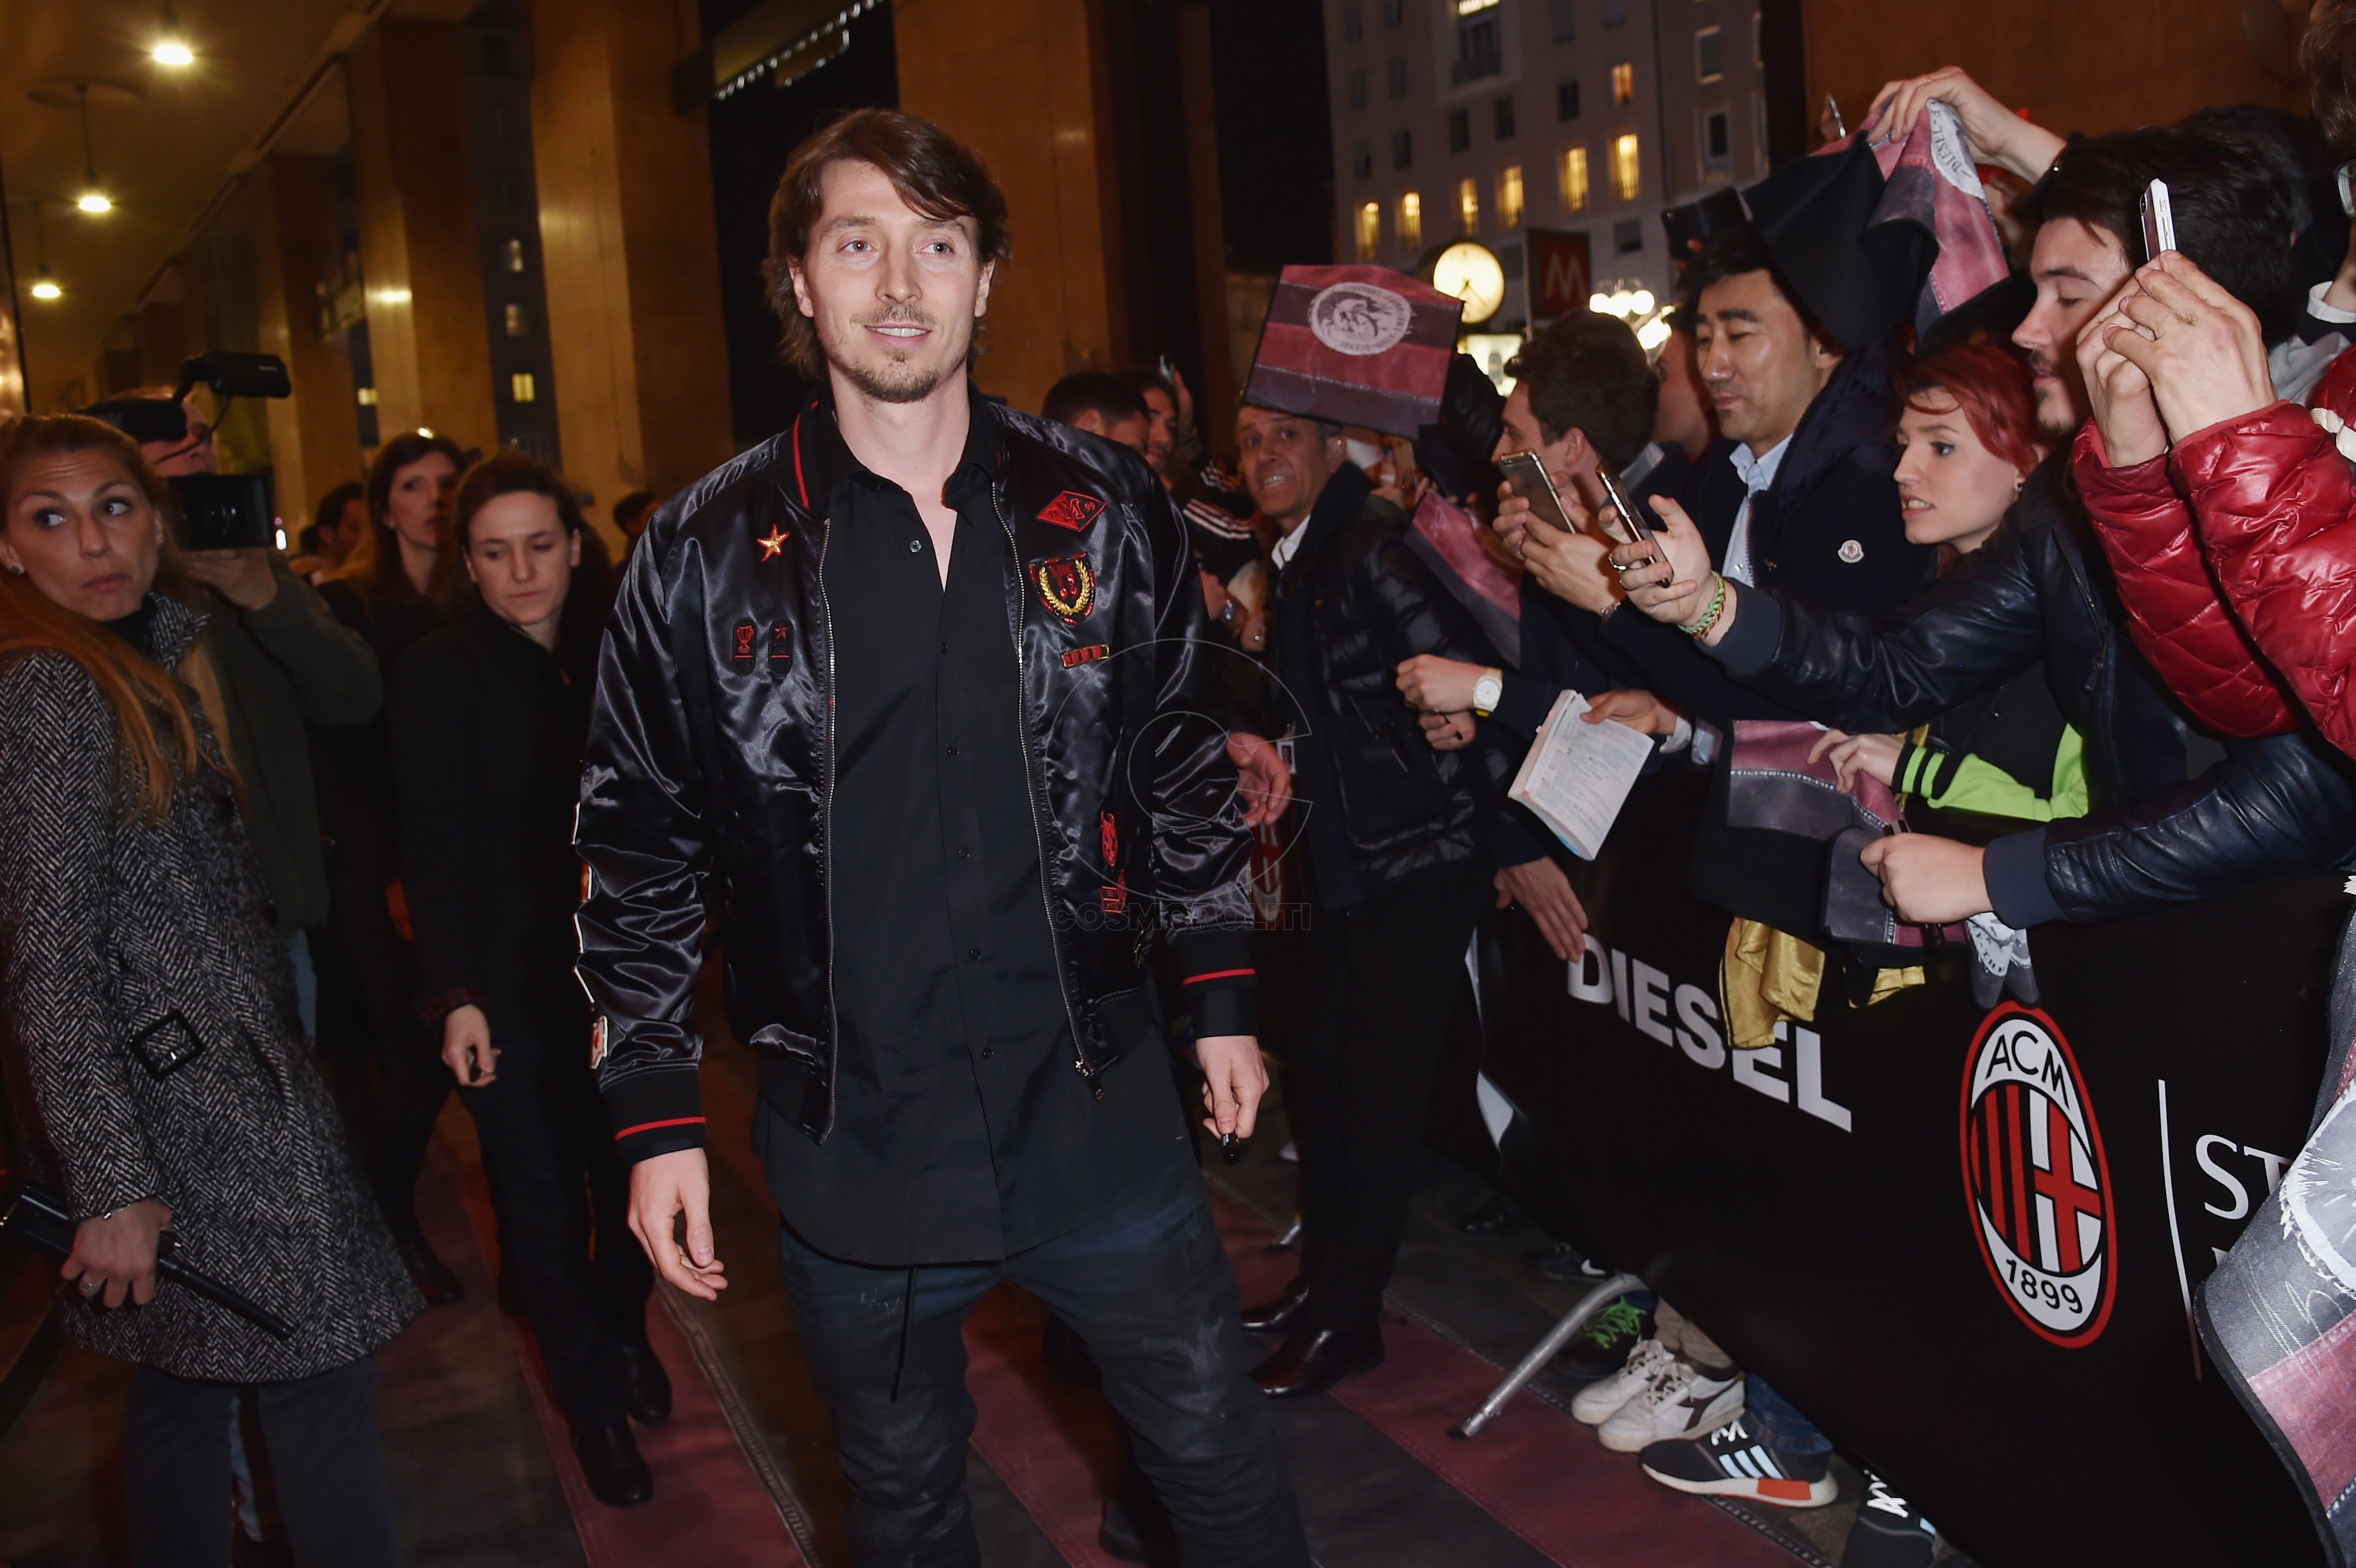 MILAN, ITALY - MARCH 14: Riccardo Montolivo attends The New Bomber Presentation at the Diesel Store on March 14, 2017 in Milan, Italy. (Photo by Jacopo Raule/Getty Images for Diesel)